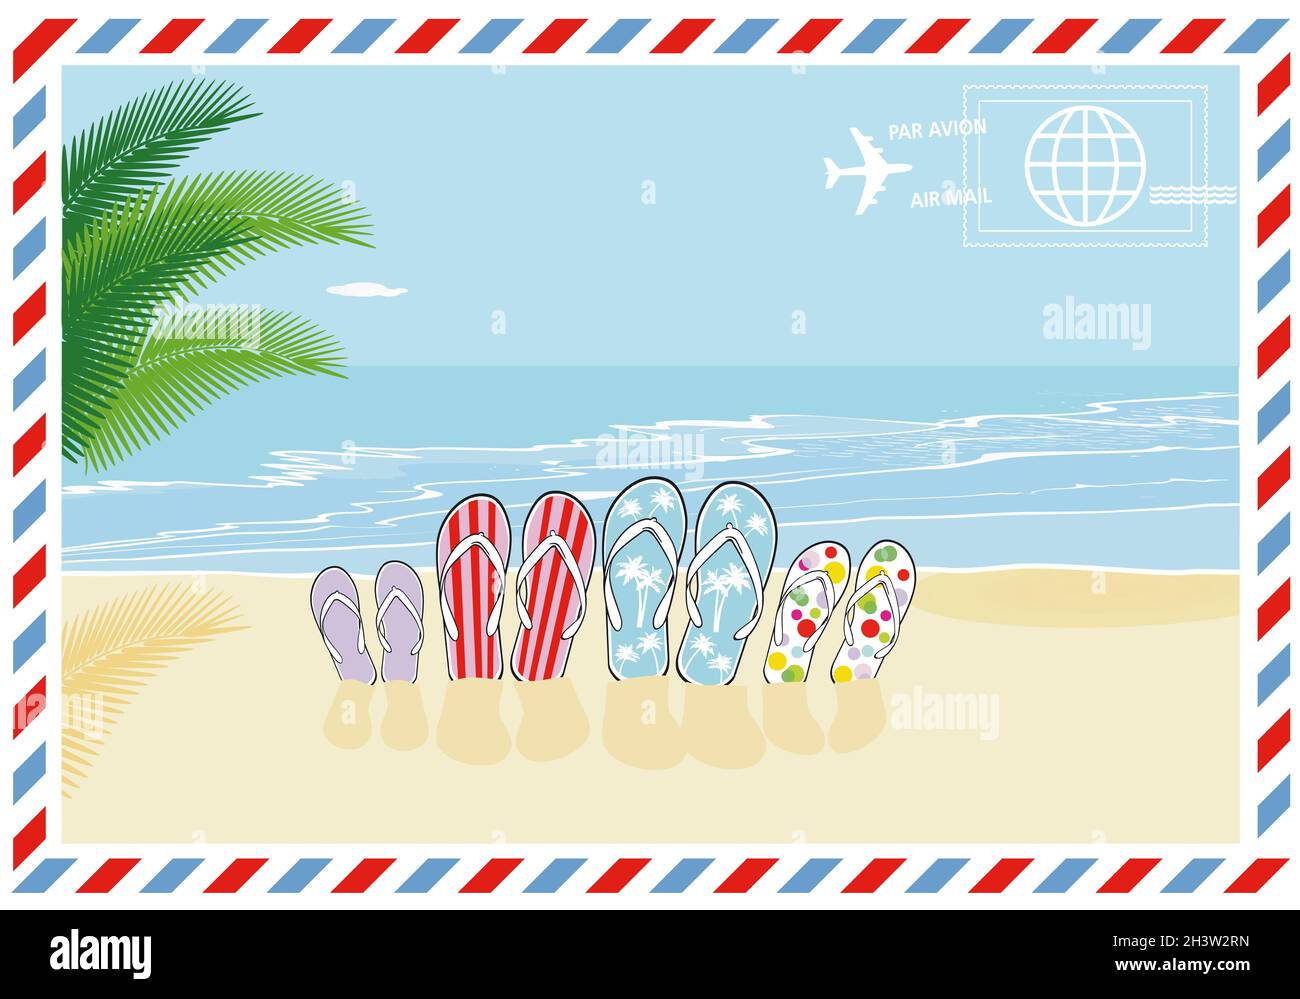 Vacation and travel, greetings from the family Stock Photo